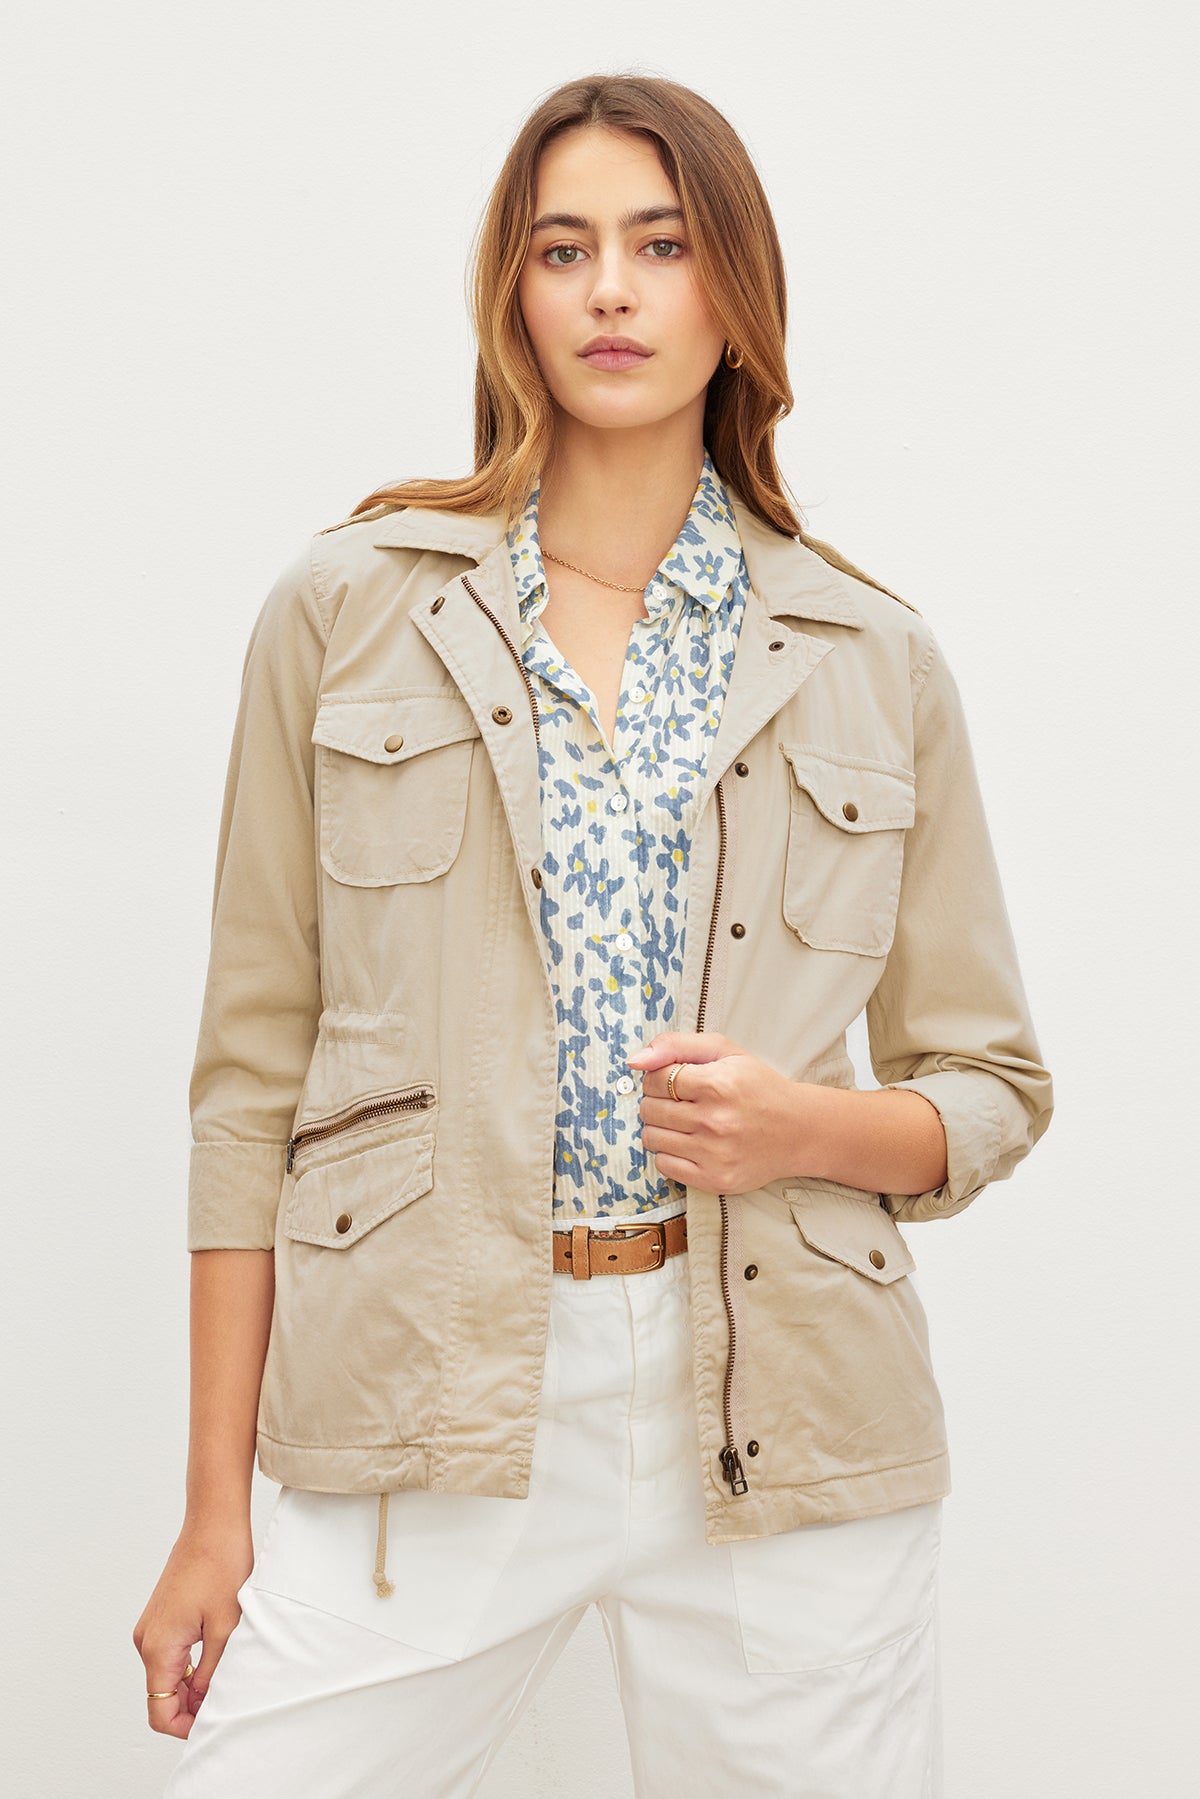 RUBY LIGHT-WEIGHT COTTON TWILL ARMY JACKET – Velvet by Graham & Spencer